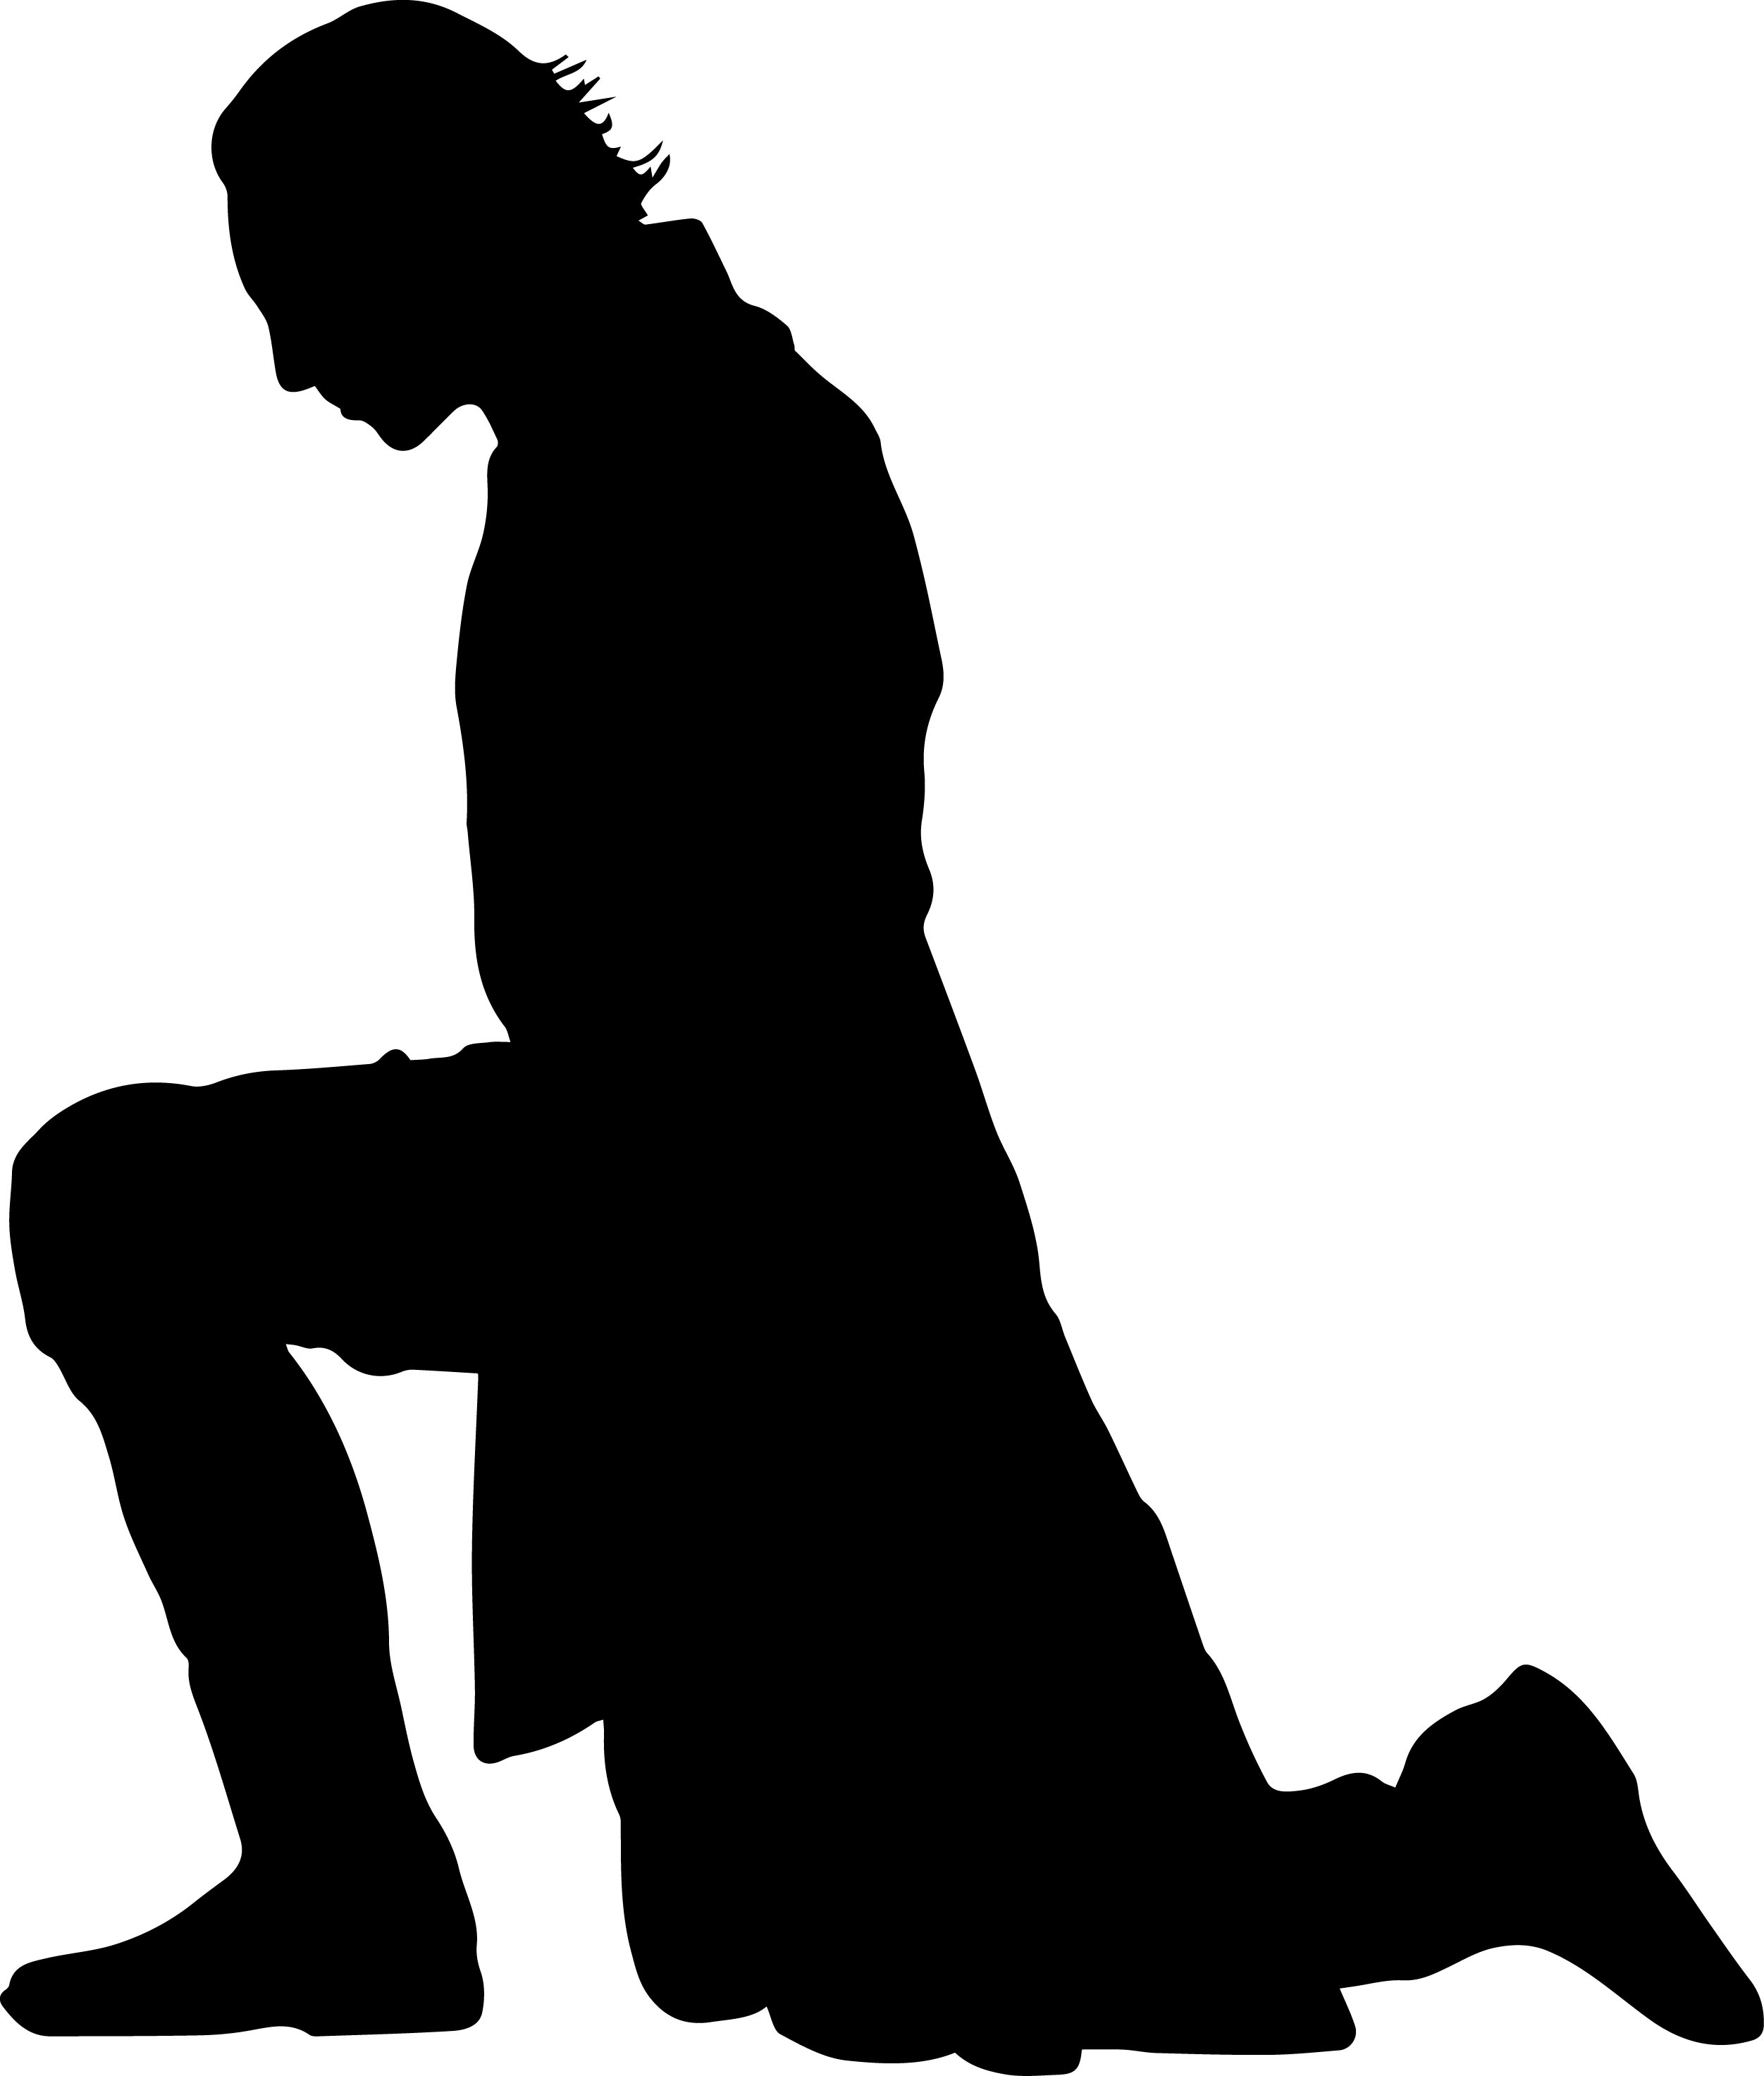 Kneeling prince silhouette clipart